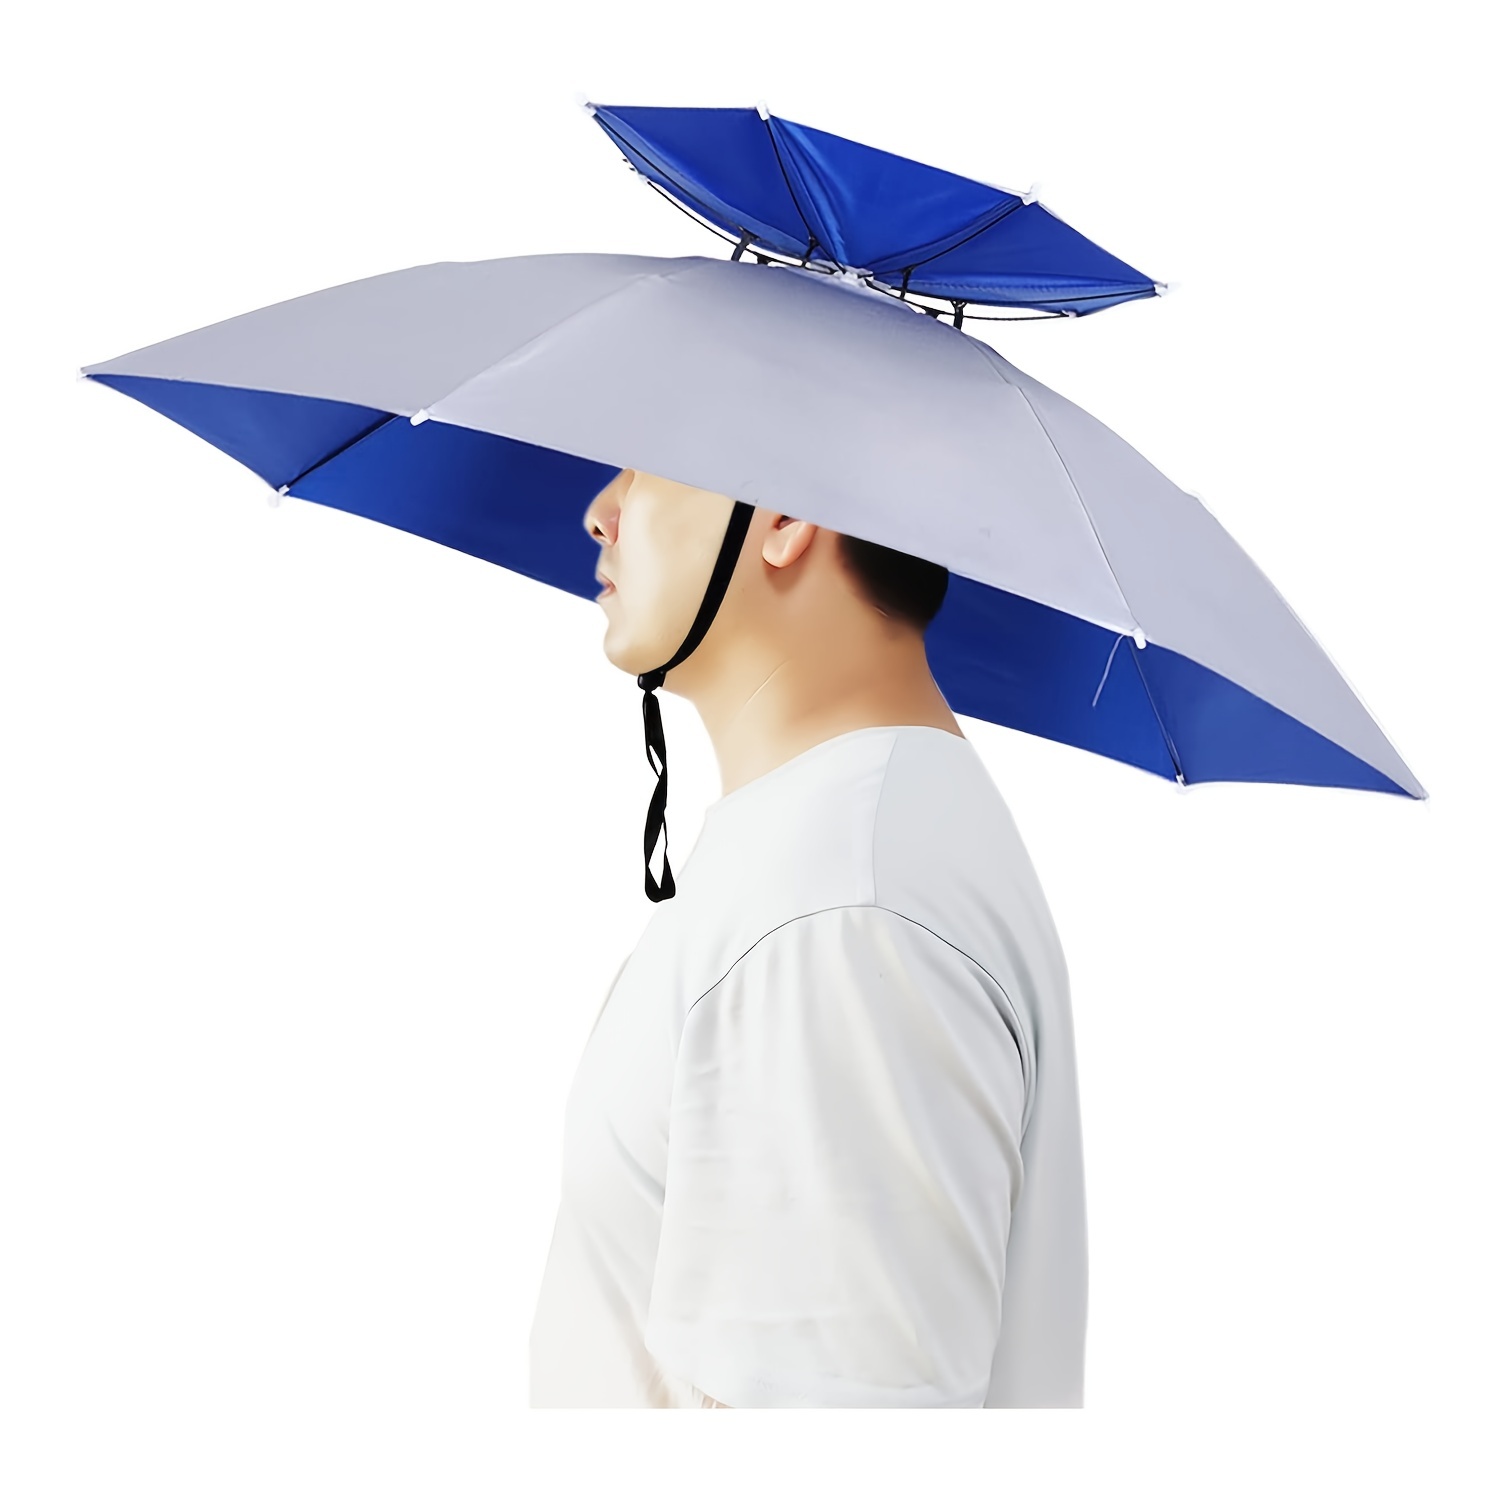 35 Inch Hands Free Foldable Anti UV Adjustable Umbrella Cap Suitable For  Fishing Golf Camping Beach Gardening Sun Shade Outdoor